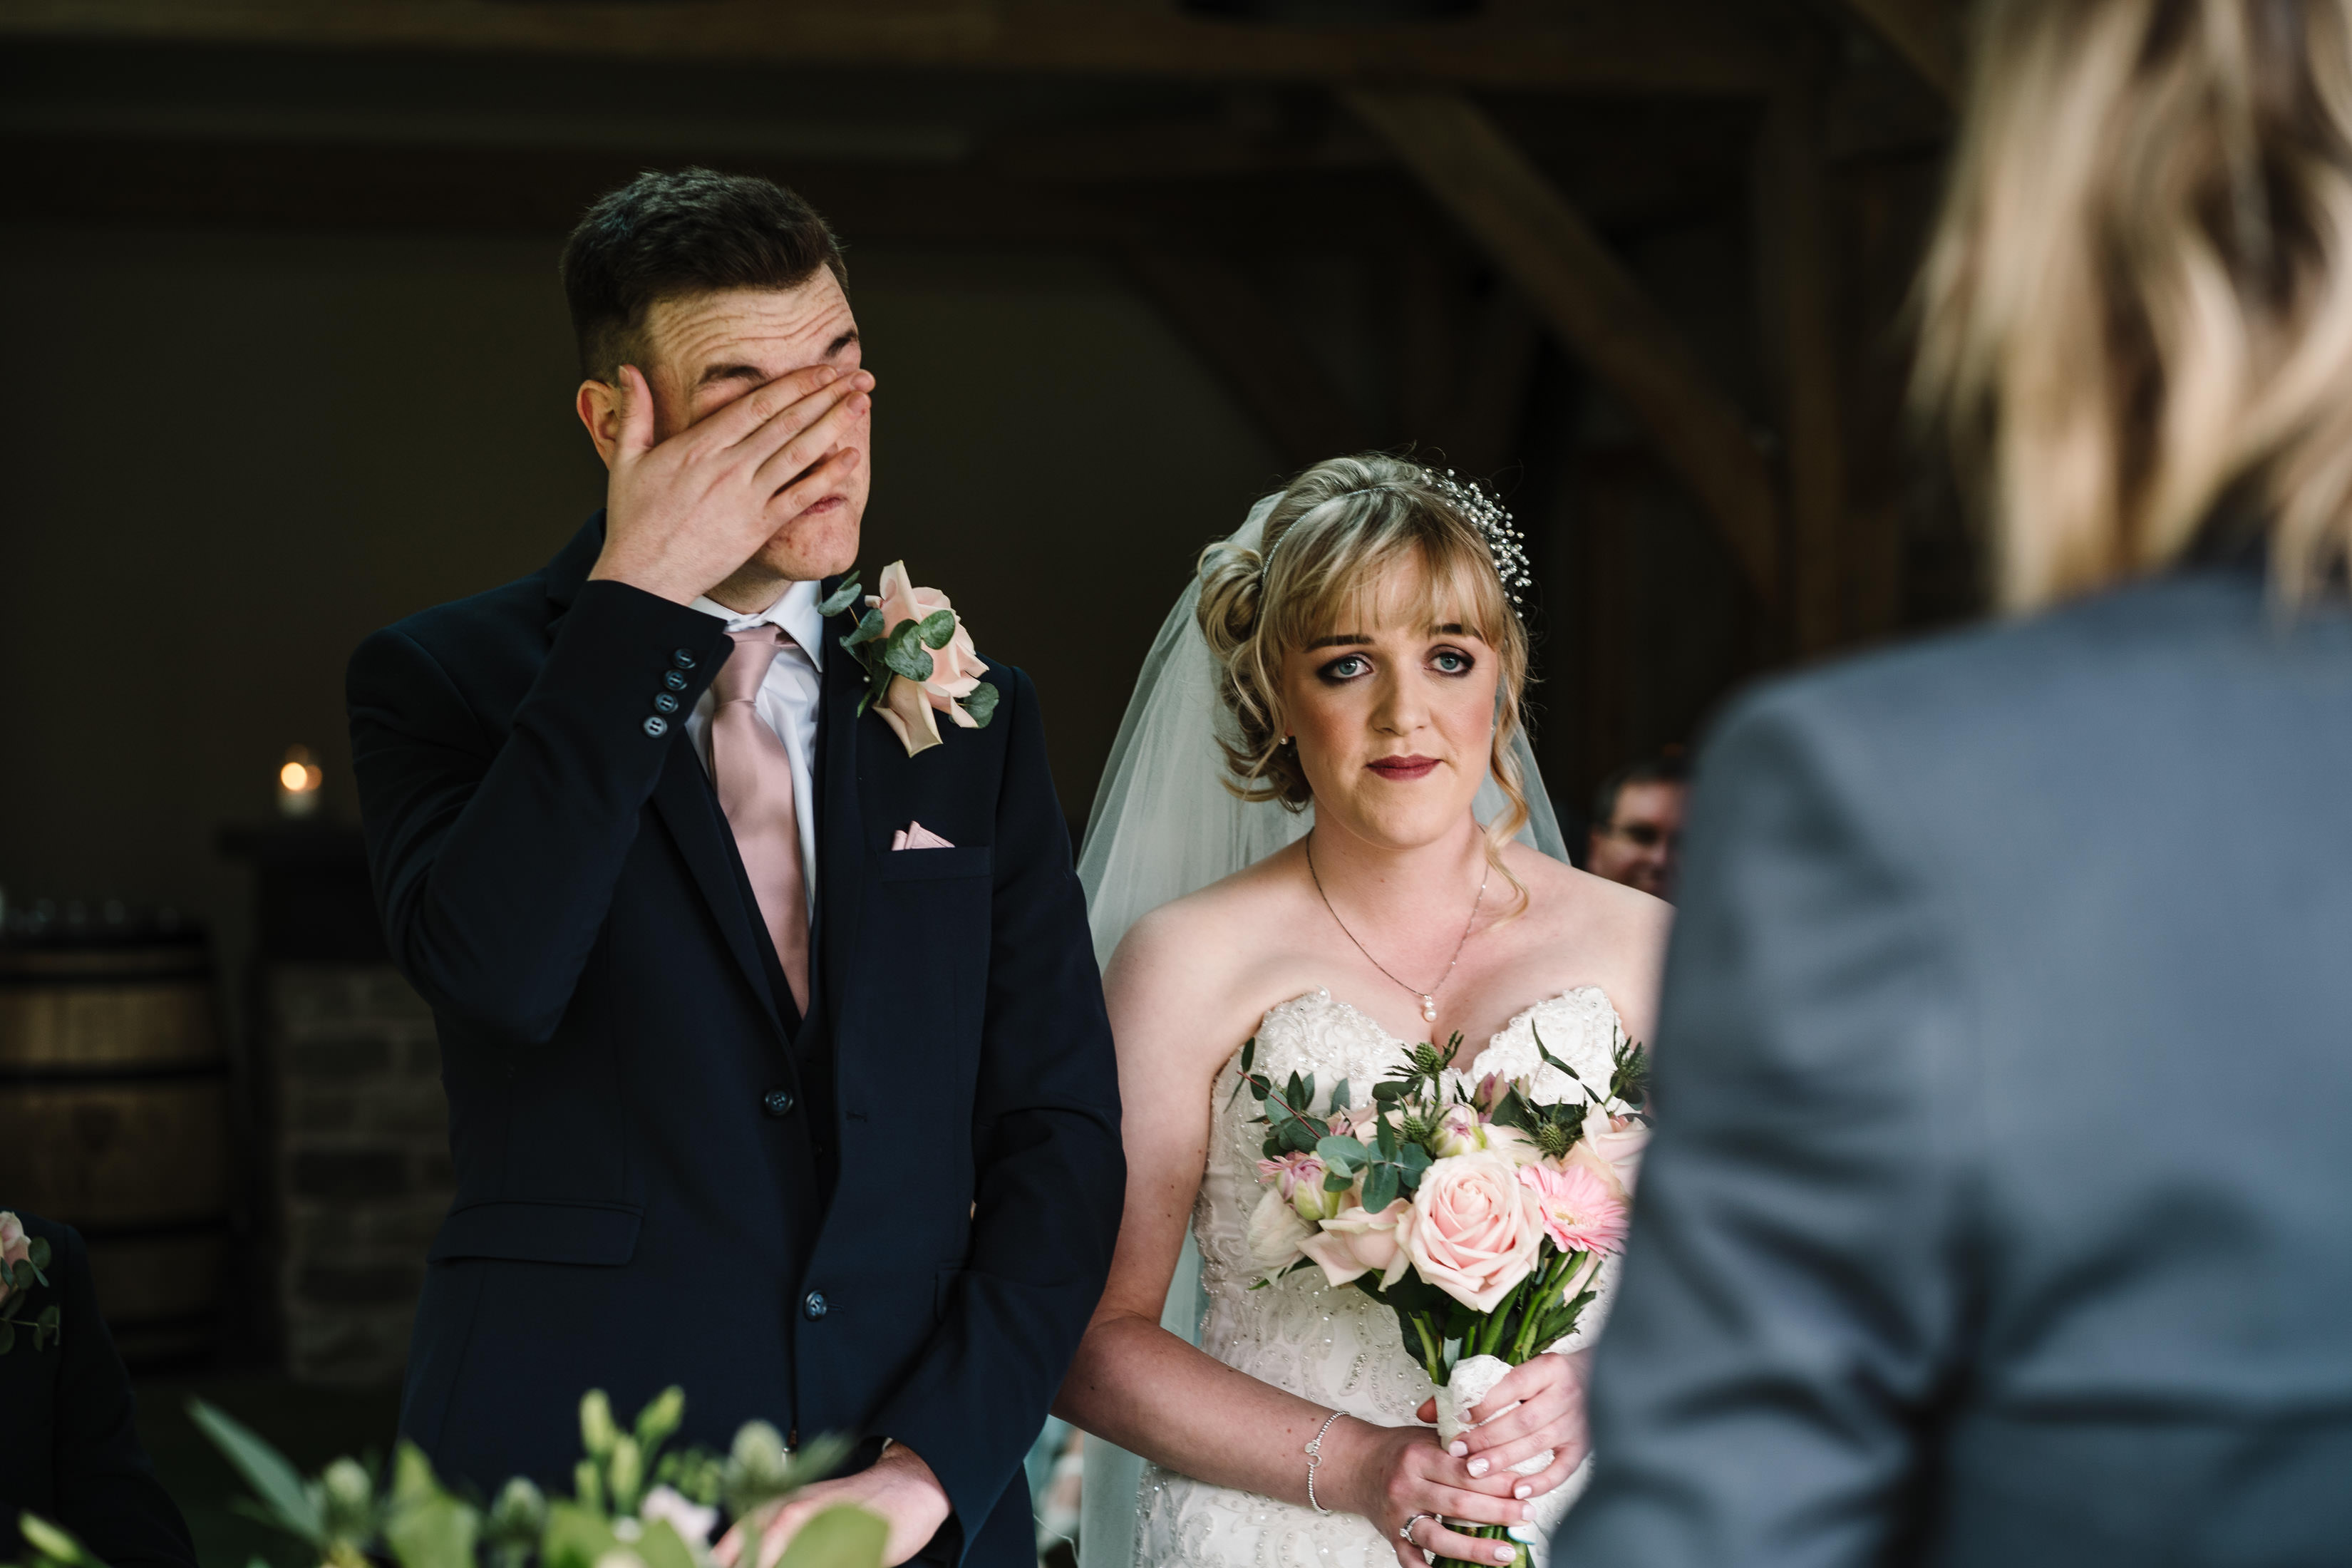 Groom wiping his tears away during wedding ceremony